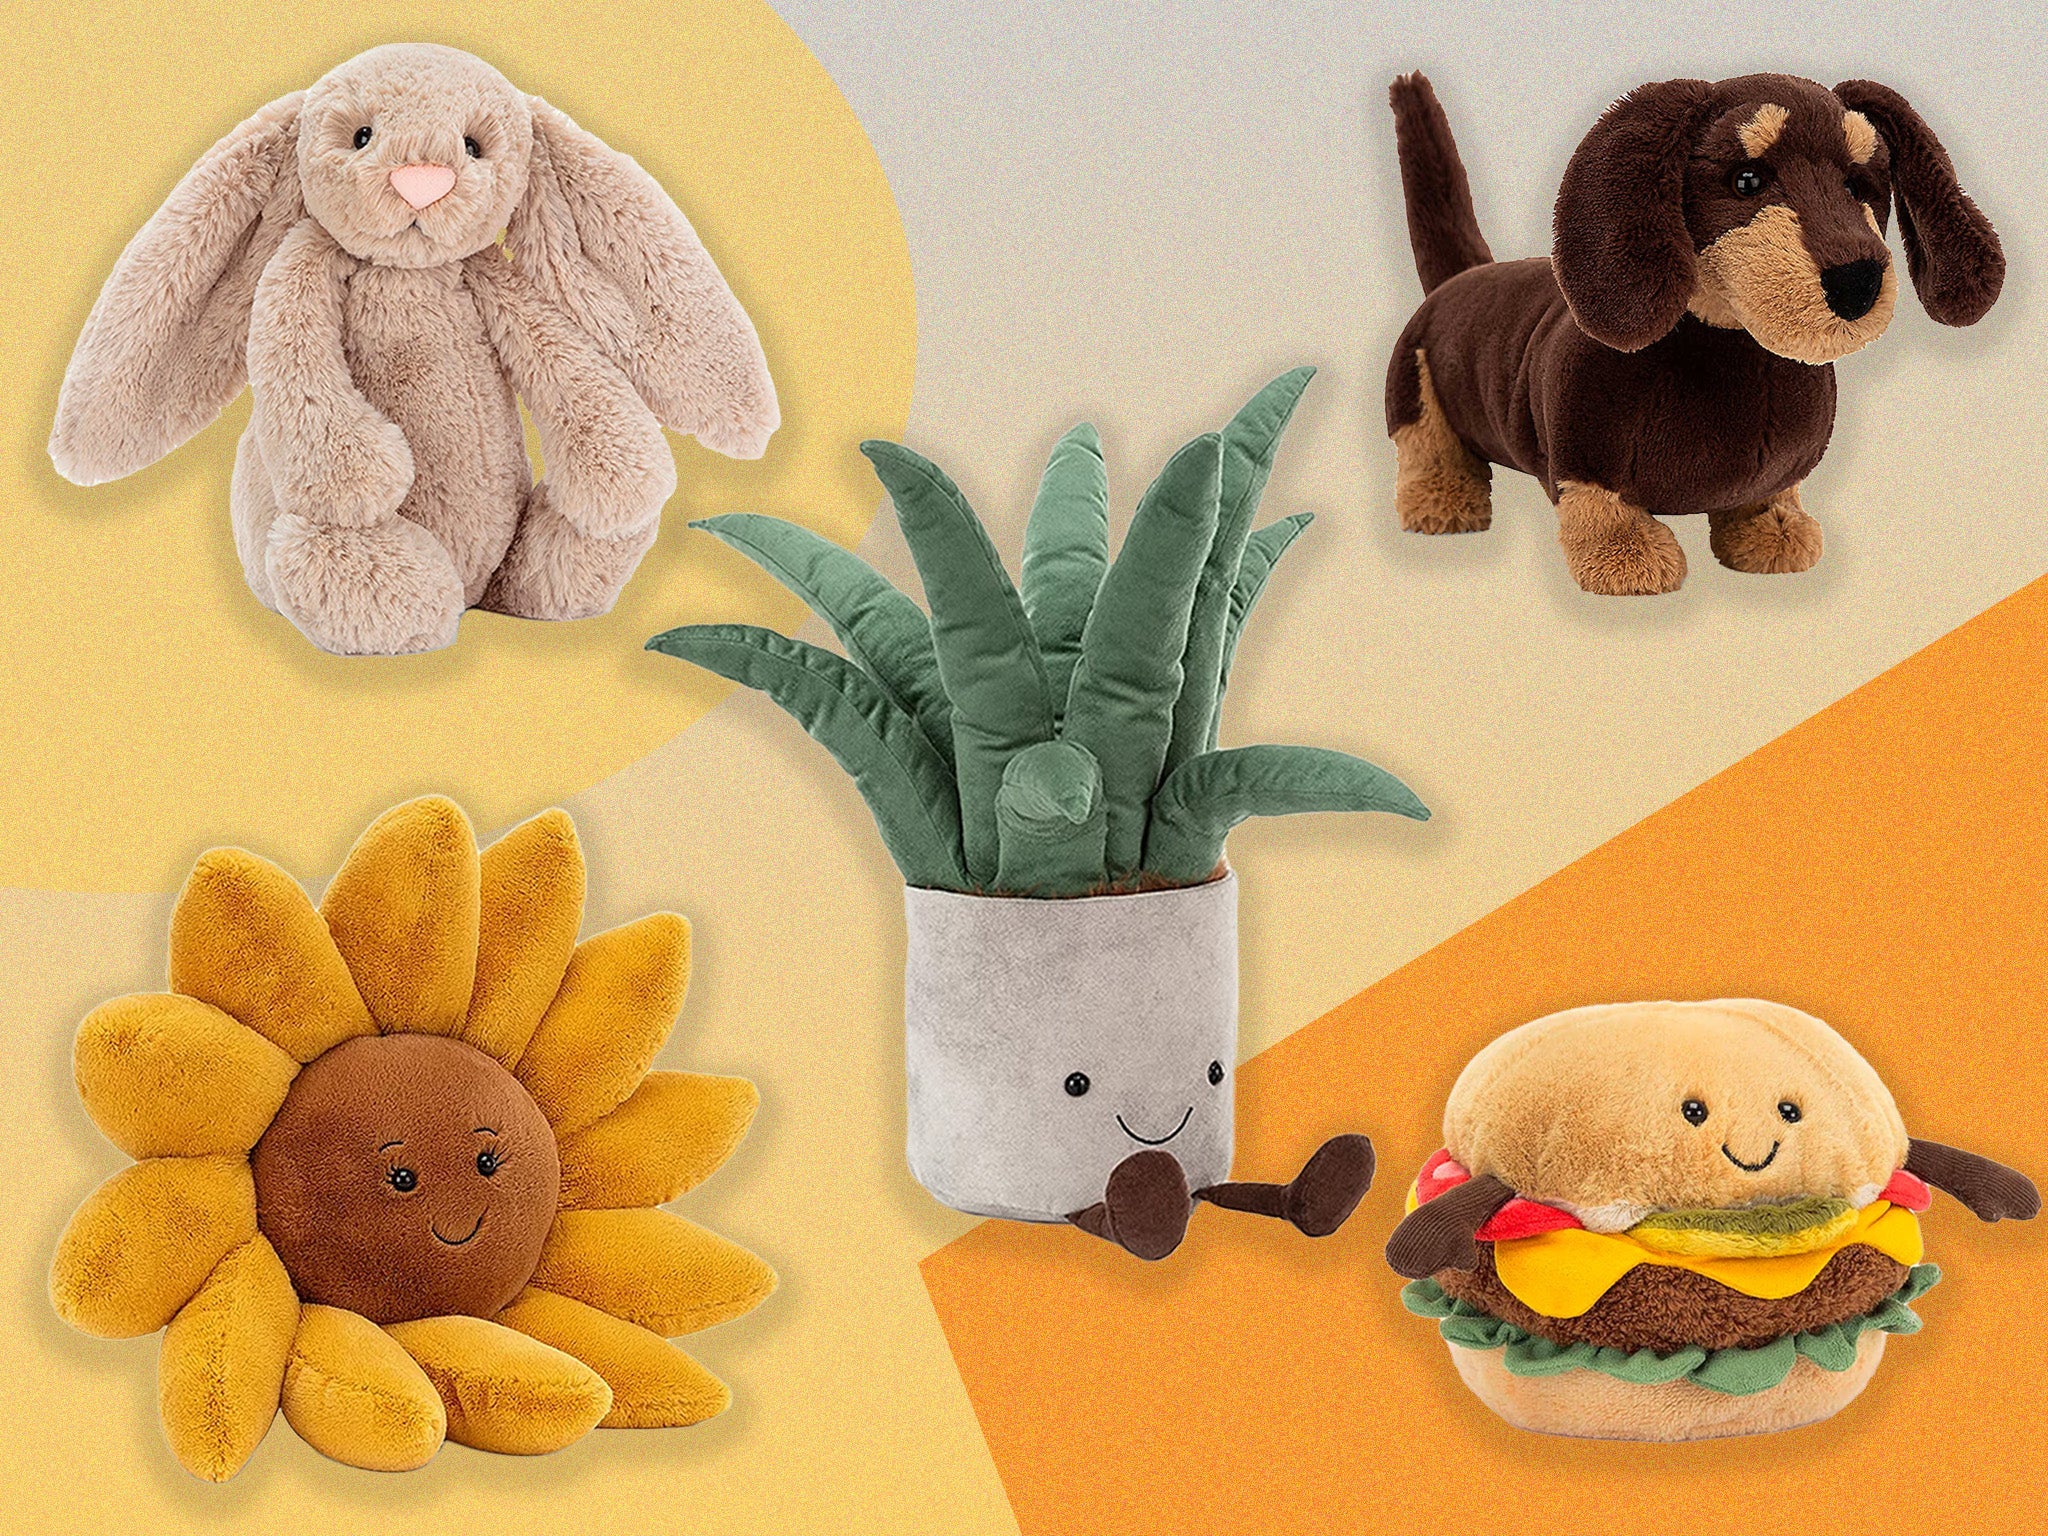 Jellycat stuffed animals are still a top trend: Here’s where to buy the popular kids’ toys